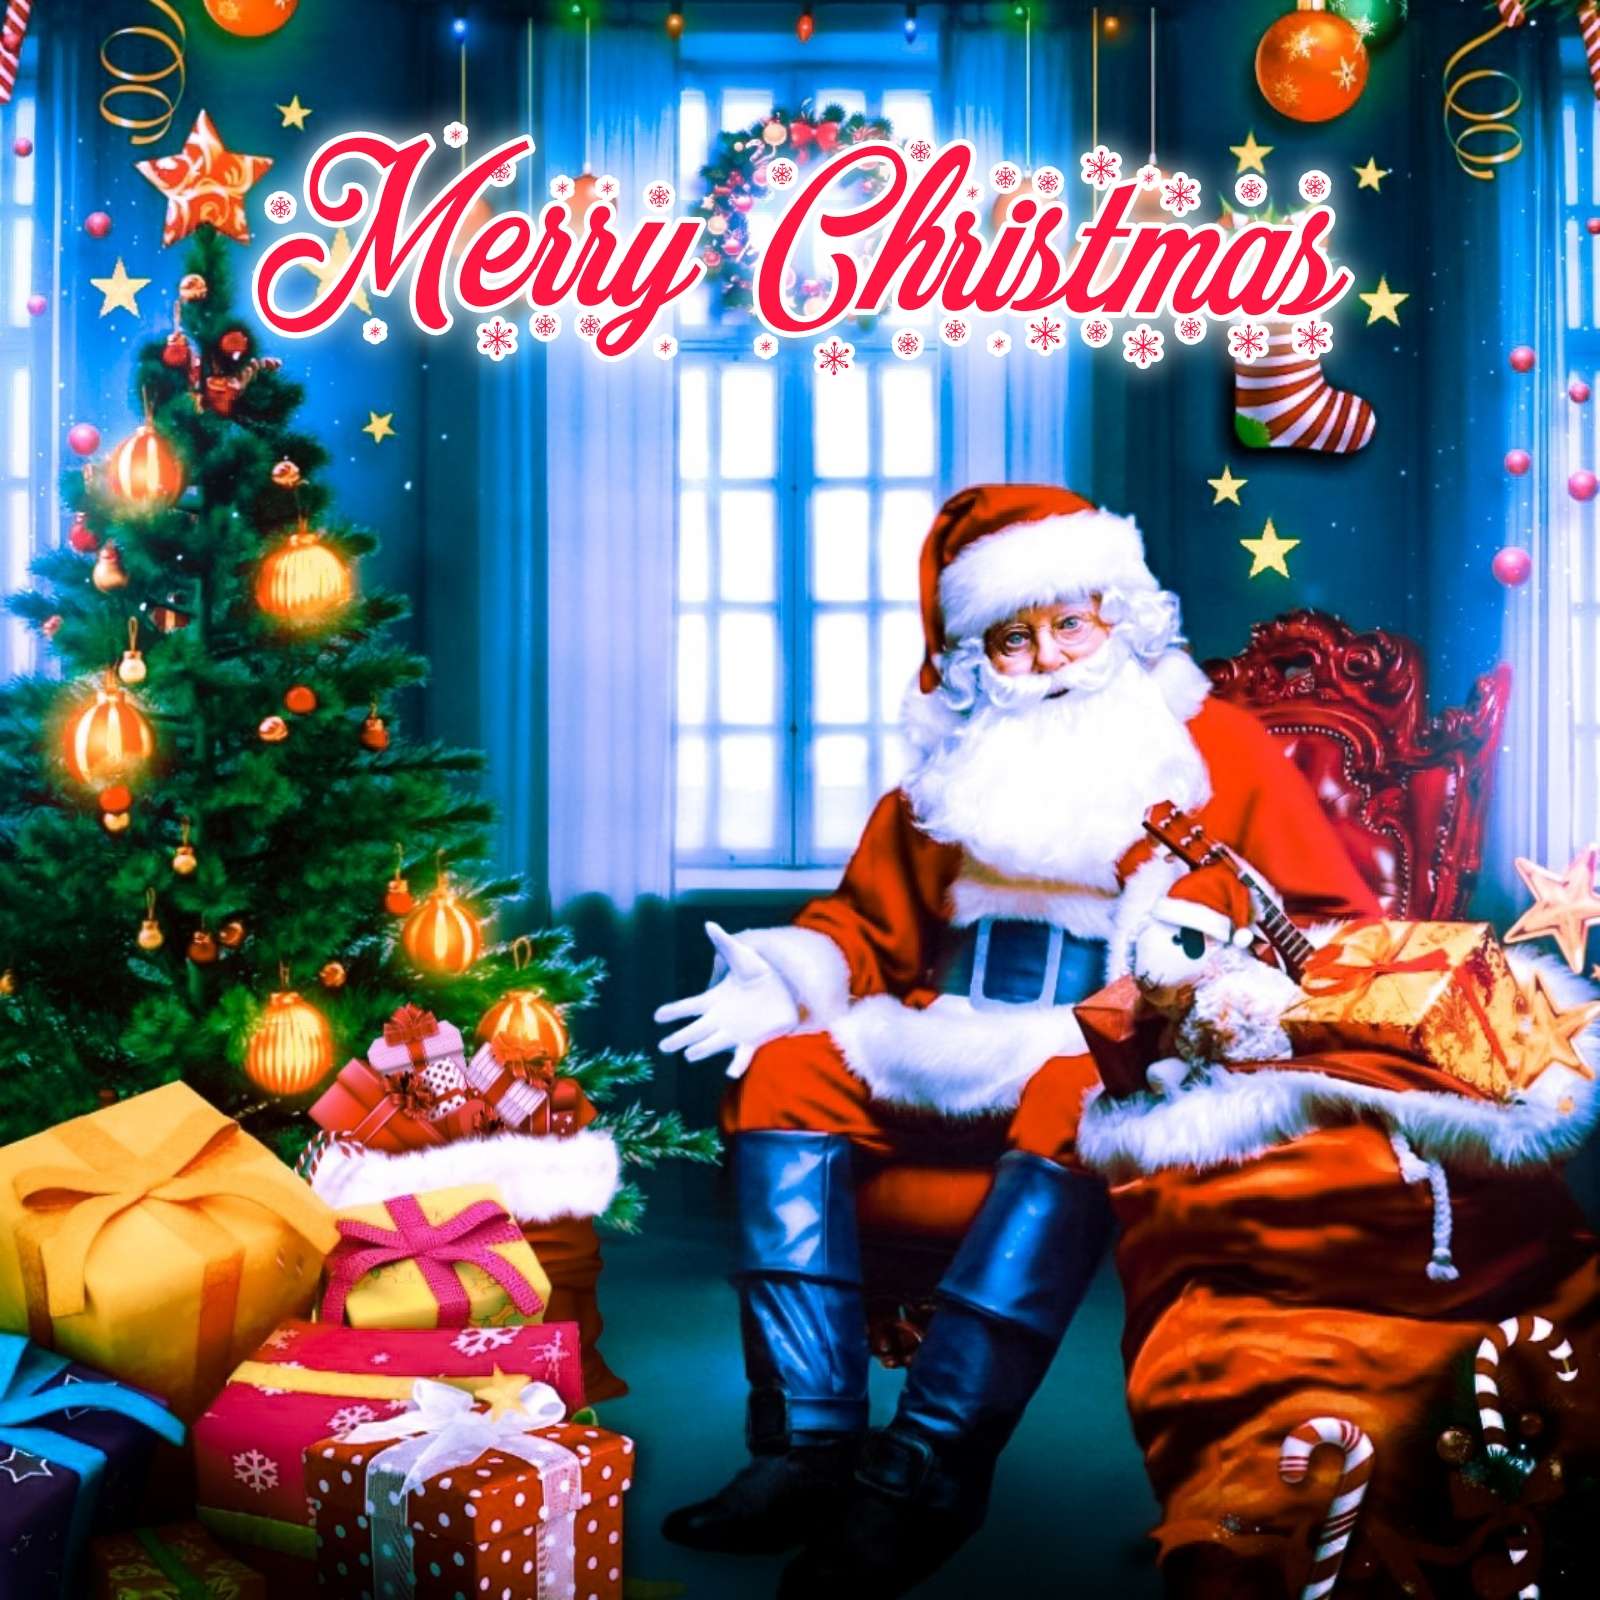 Merry Christmas Images With Santa Claus